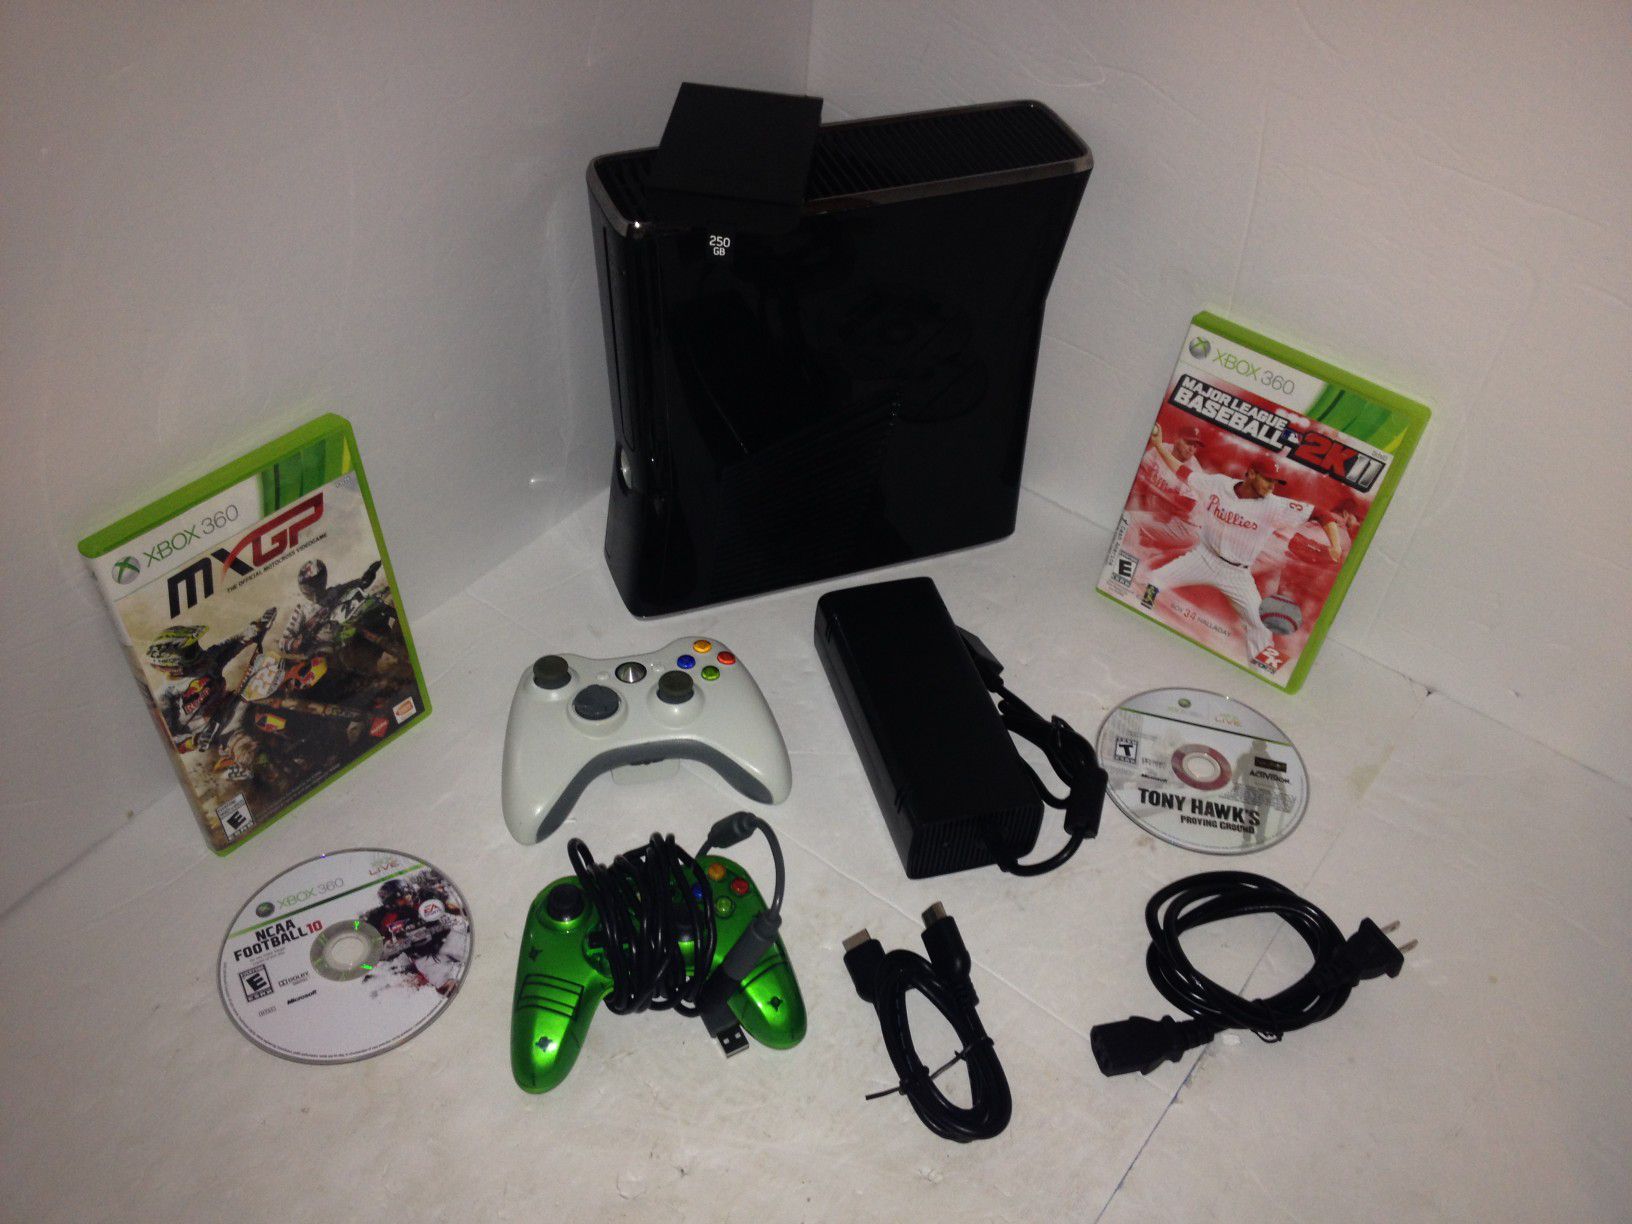 Xbox 360 Slim with 250 GB hard drive and games